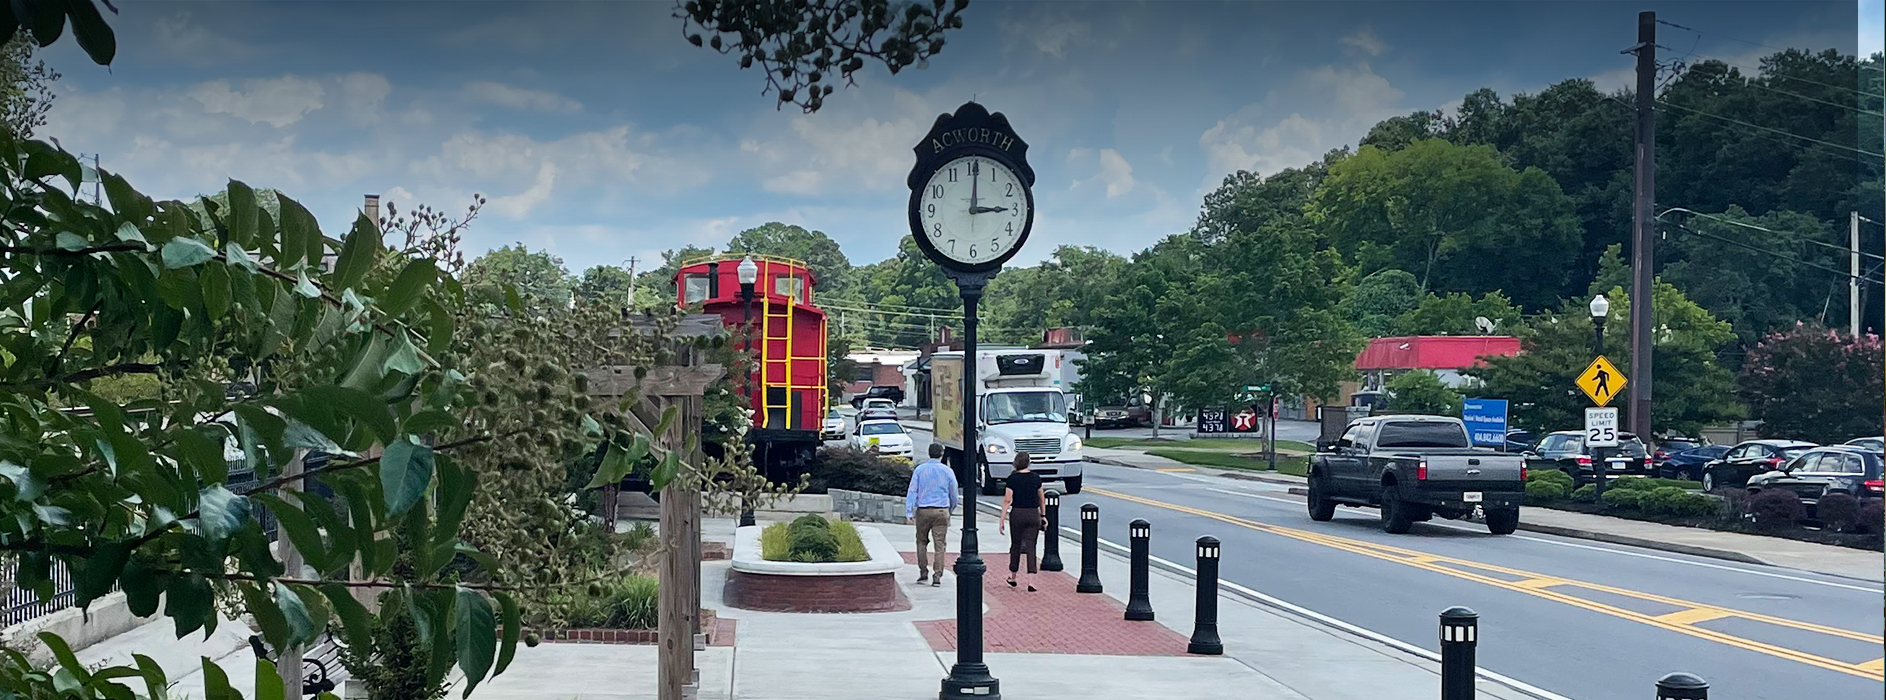 Sidewalk scene with people walking near a clock post and a railroad car, adjacent to a busy street with passing vehicles and lush green trees in the background.